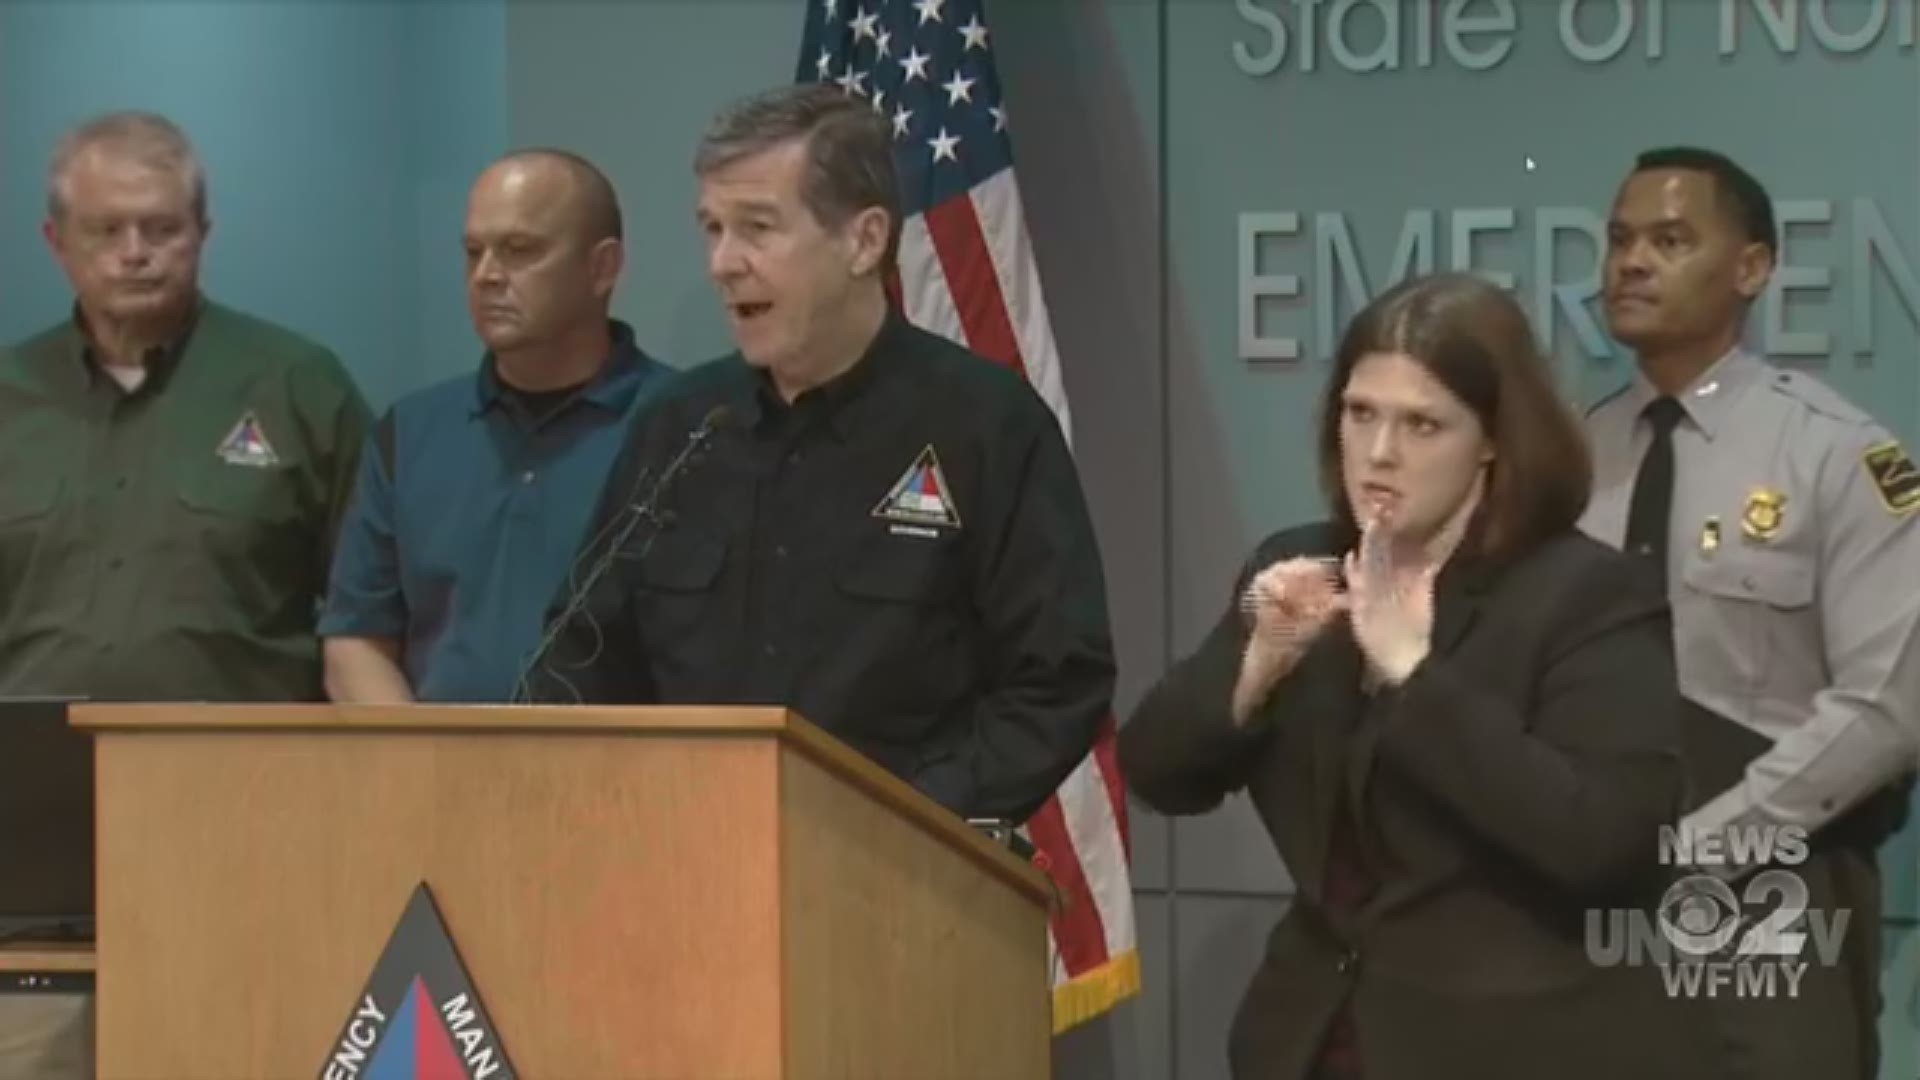 Friday, Gov. Roy Cooper along with other First Responders pleaded with people to not drive around road barricades. NC has a long way to recovery from Florence, the governor said in his daily media briefing.